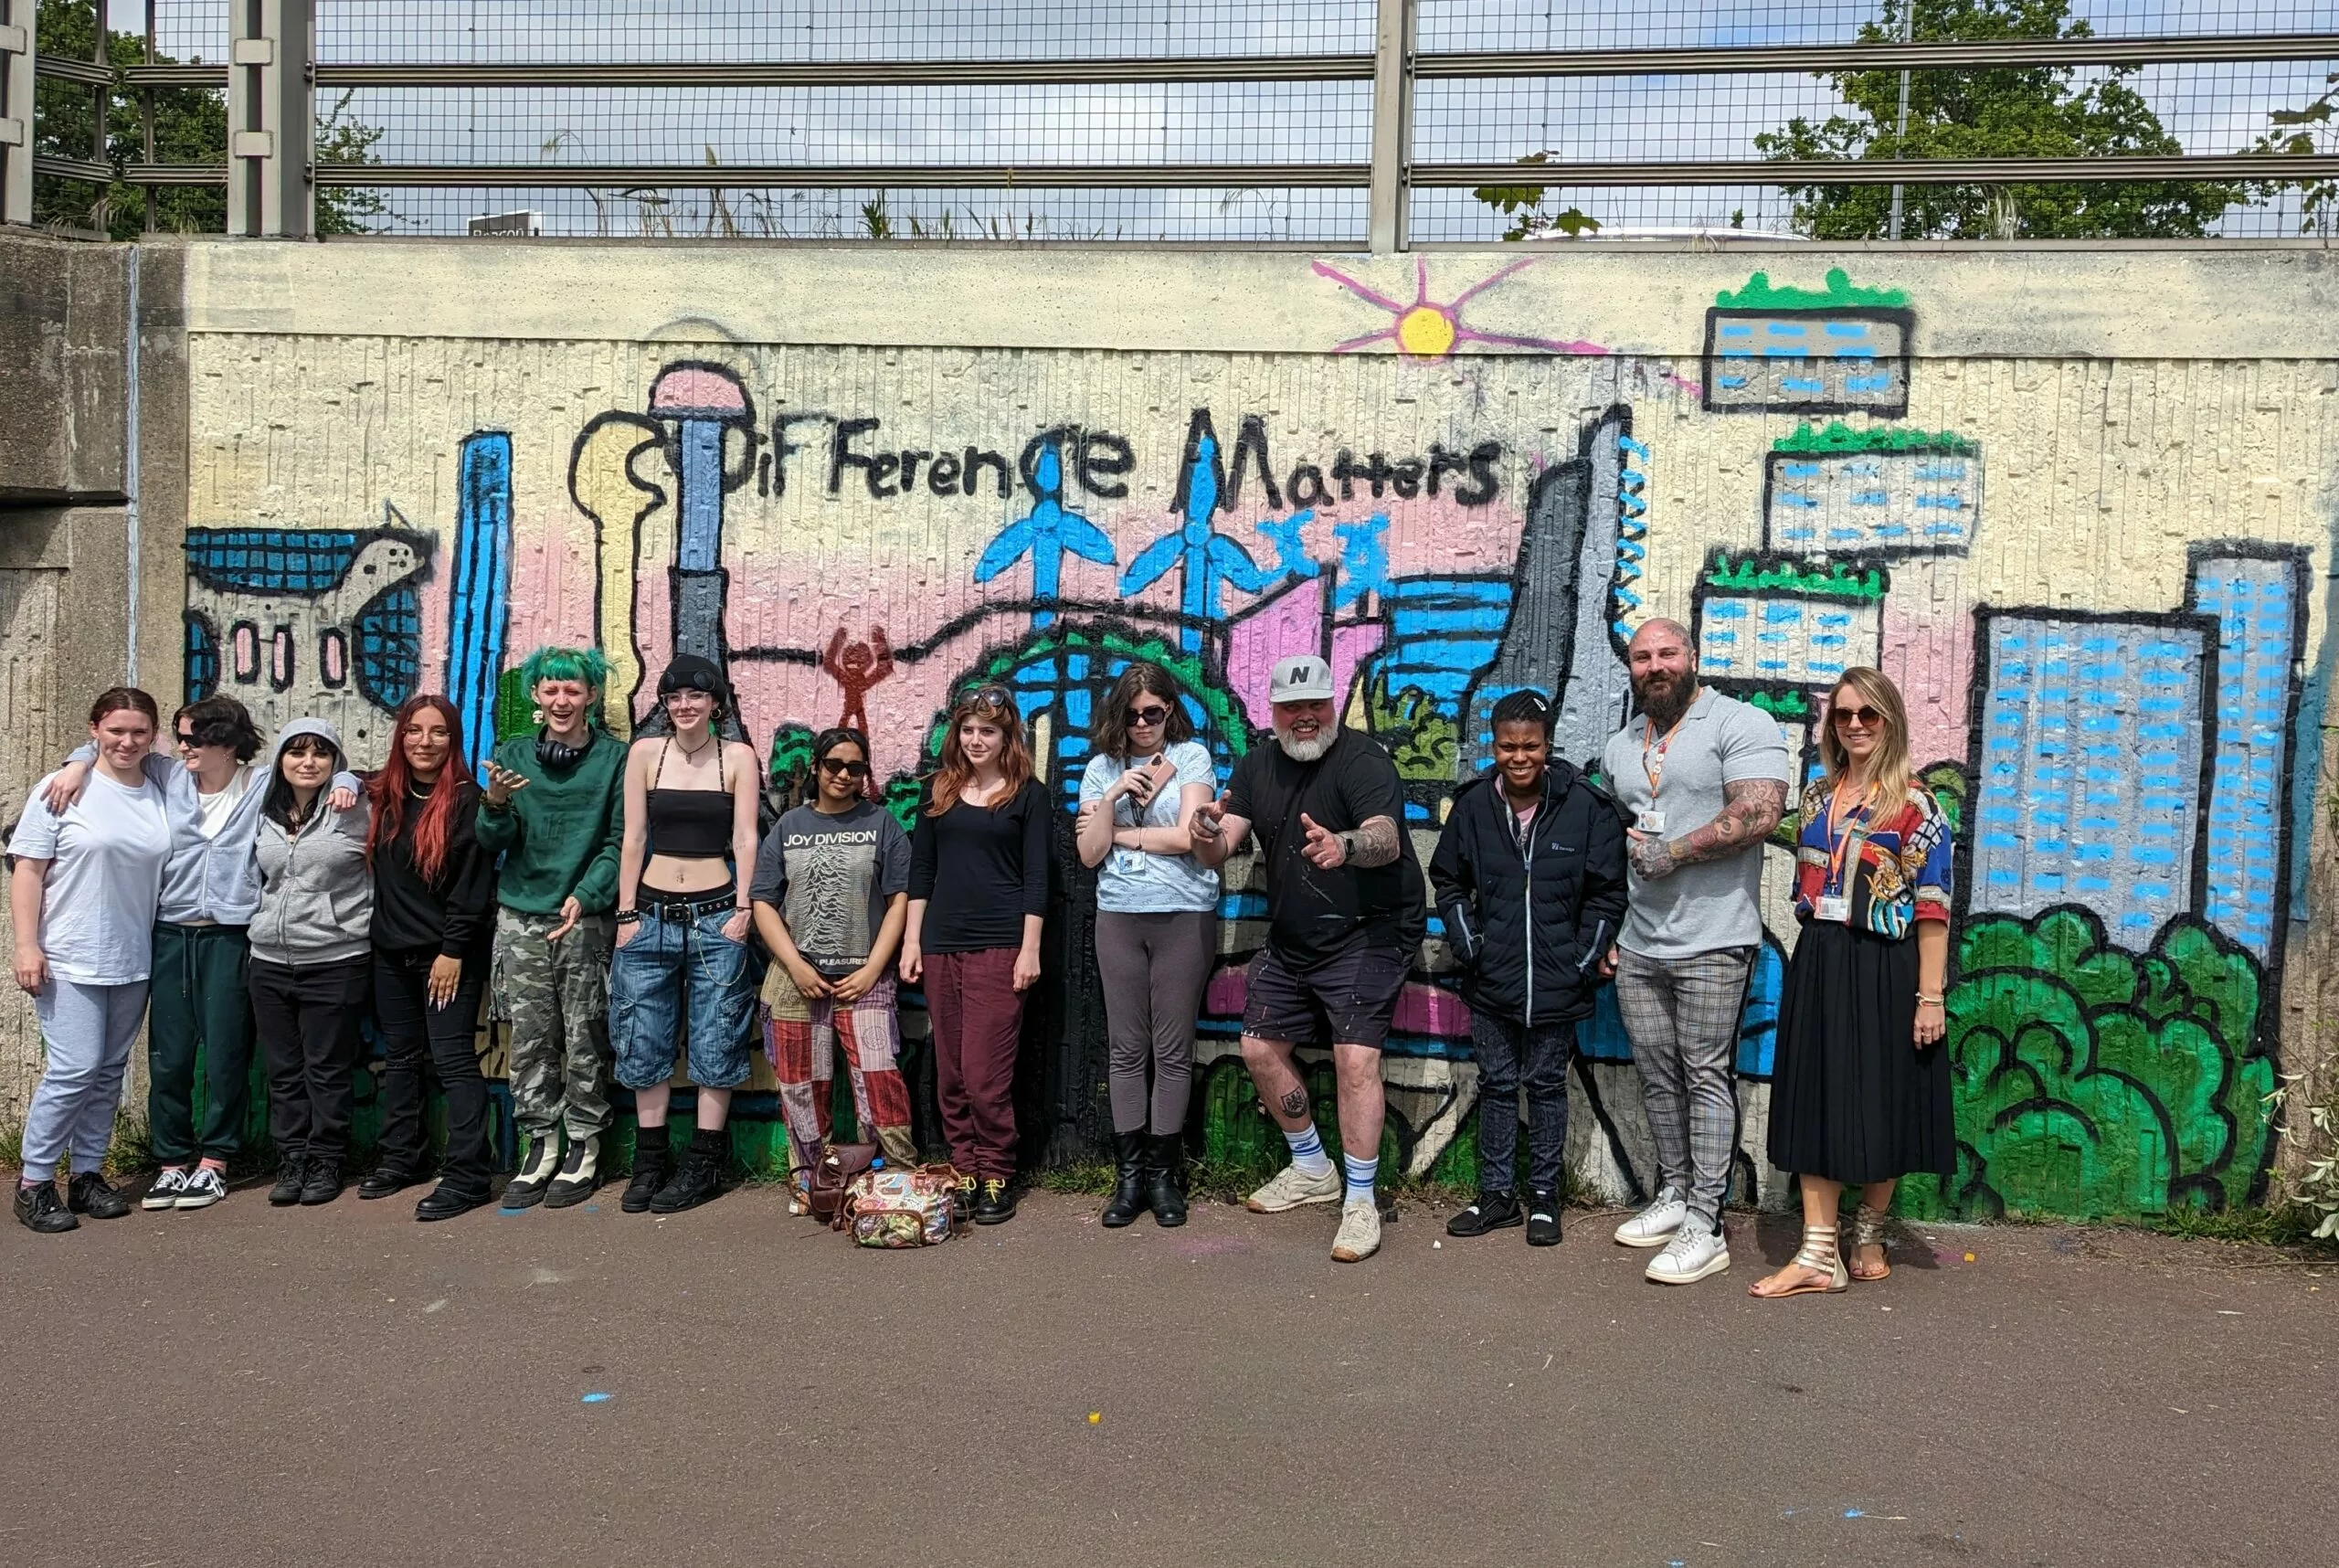 MK College students work with internationally renowned graffiti artist on ‘Difference Maker’ mural